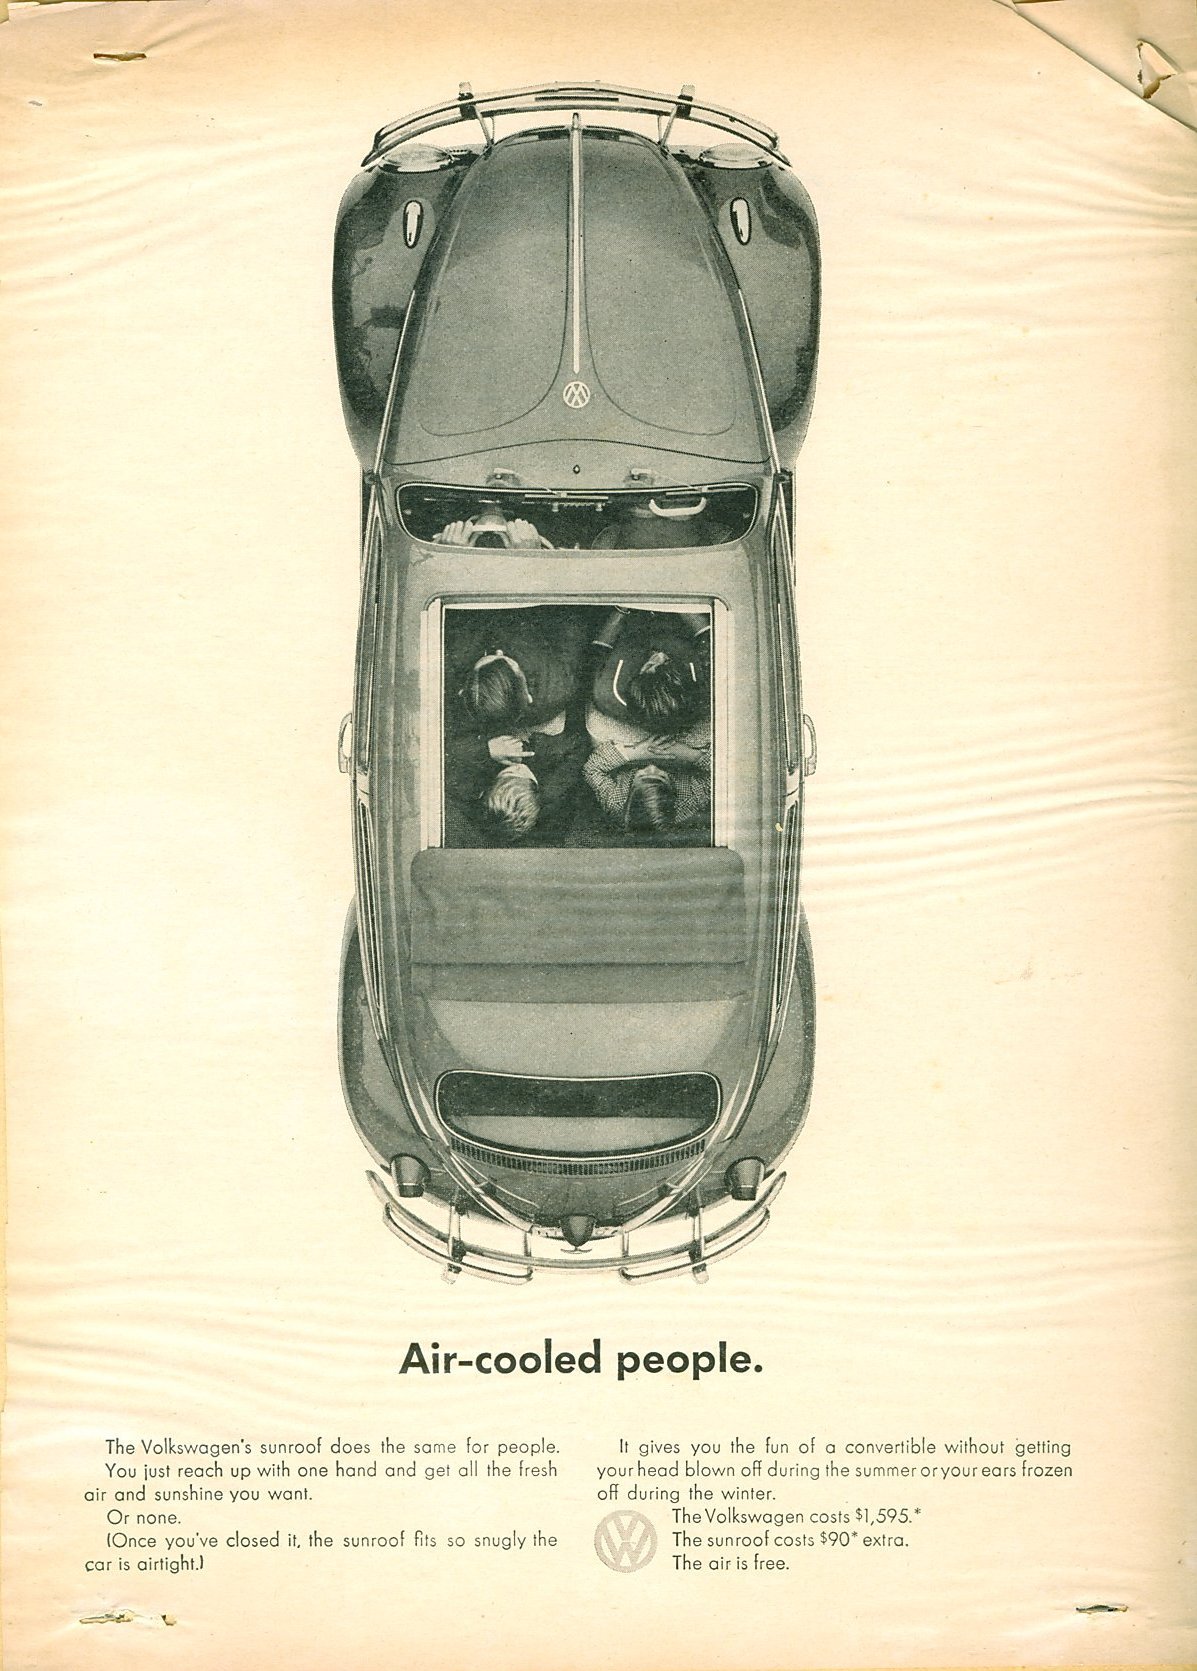 Air-cooled people